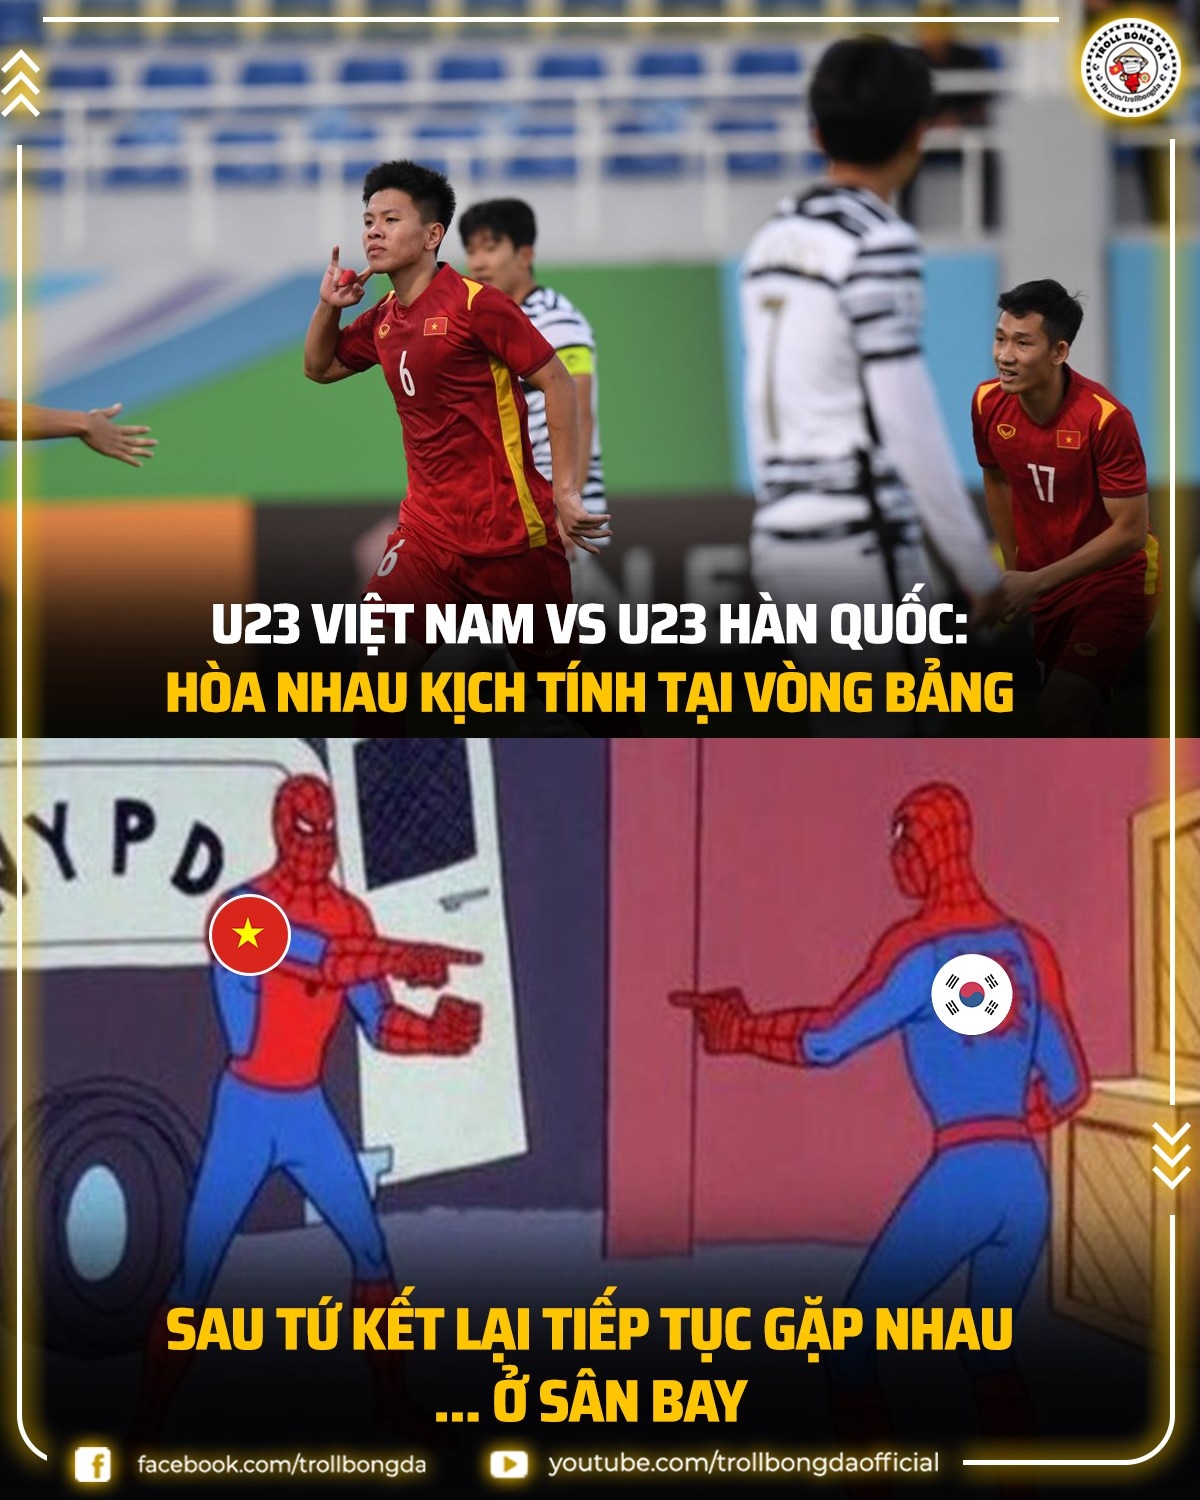 biem hoa 24h Dt anh lam nguy o nations league hinh anh 1